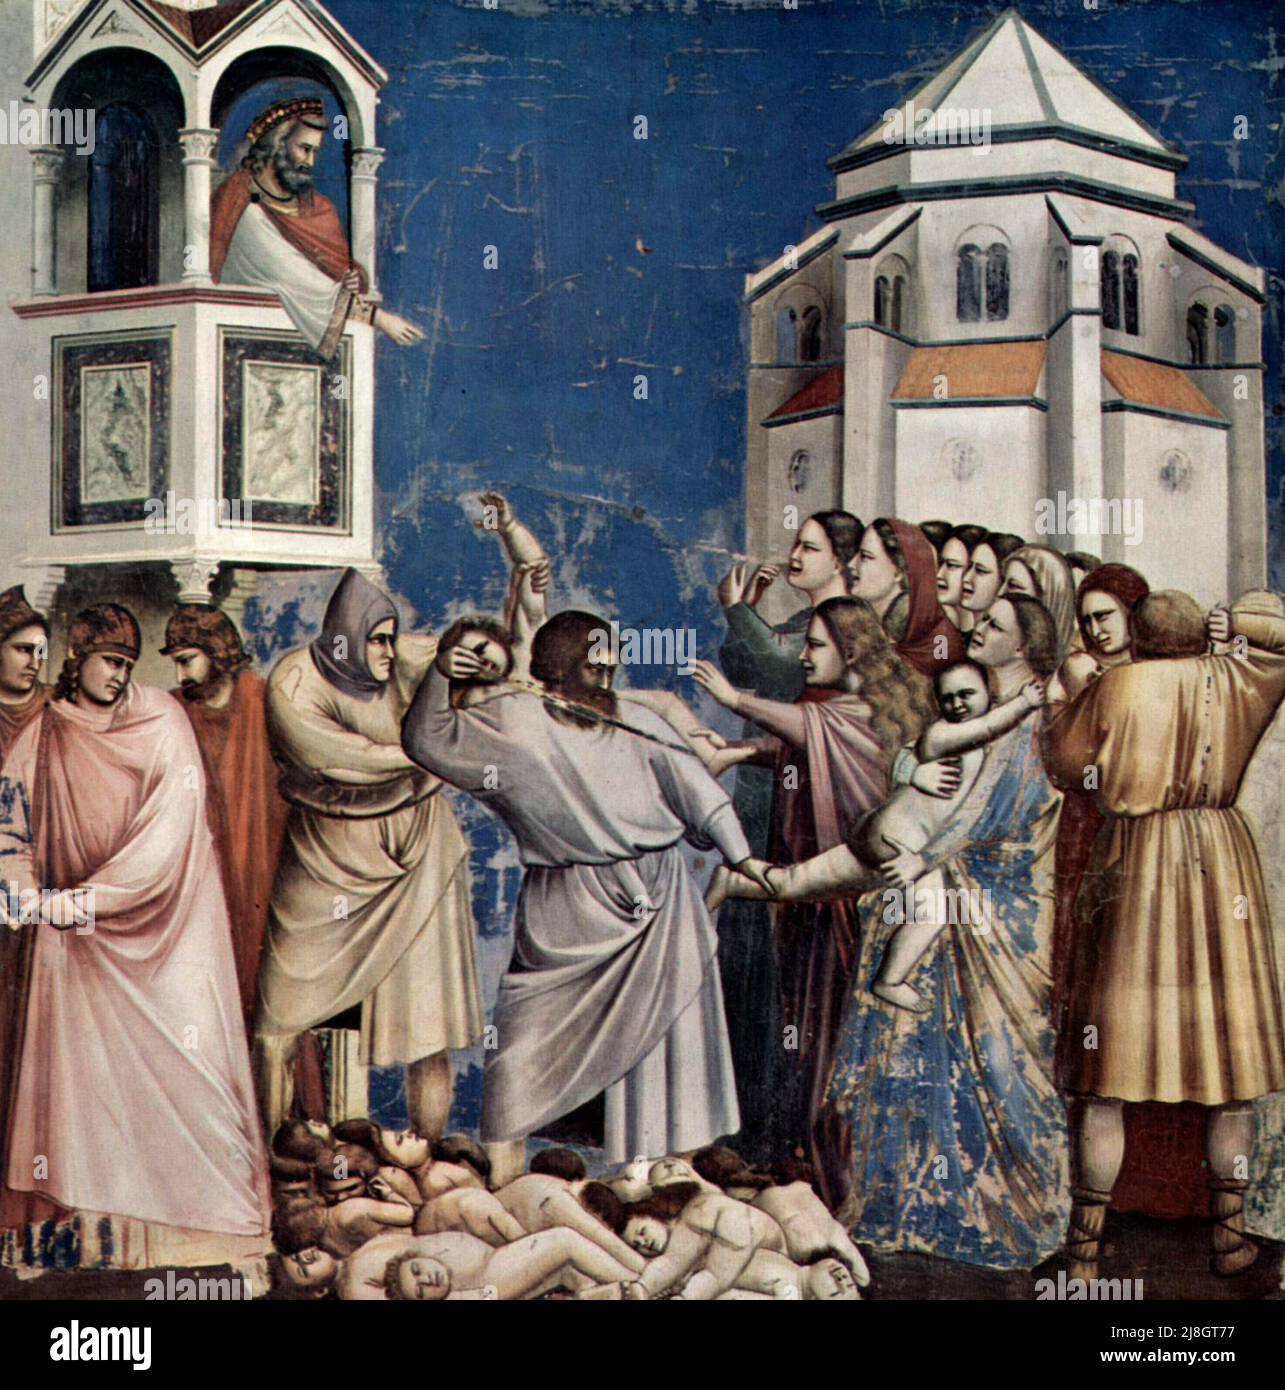 The Massacre of the Innocents  by Giotto. In this christian myth, the Three Magi asked where to find the newborn 'King of the Jews'. The Roman ruler Herod felt his position threatened amd ordered the murder of all baby boys. The father of Jesus was warned in a rea, of the event and was advised to go to Egypt, in the episode known as The Flight Into Egypt. Stock Photo